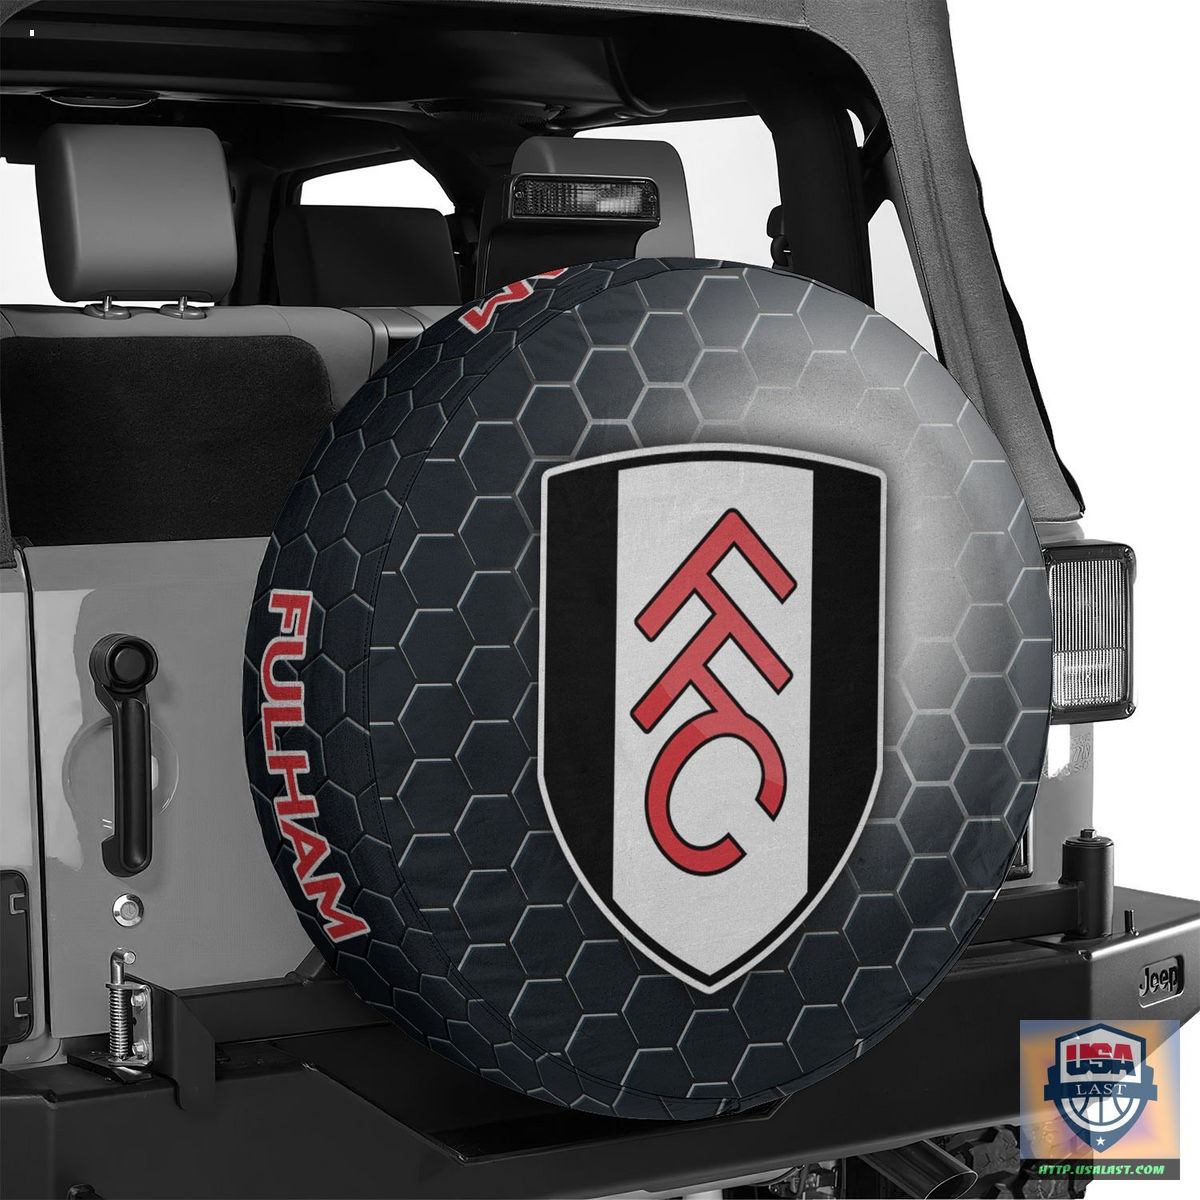 AMAZING Fulham FC Spare Tire Cover